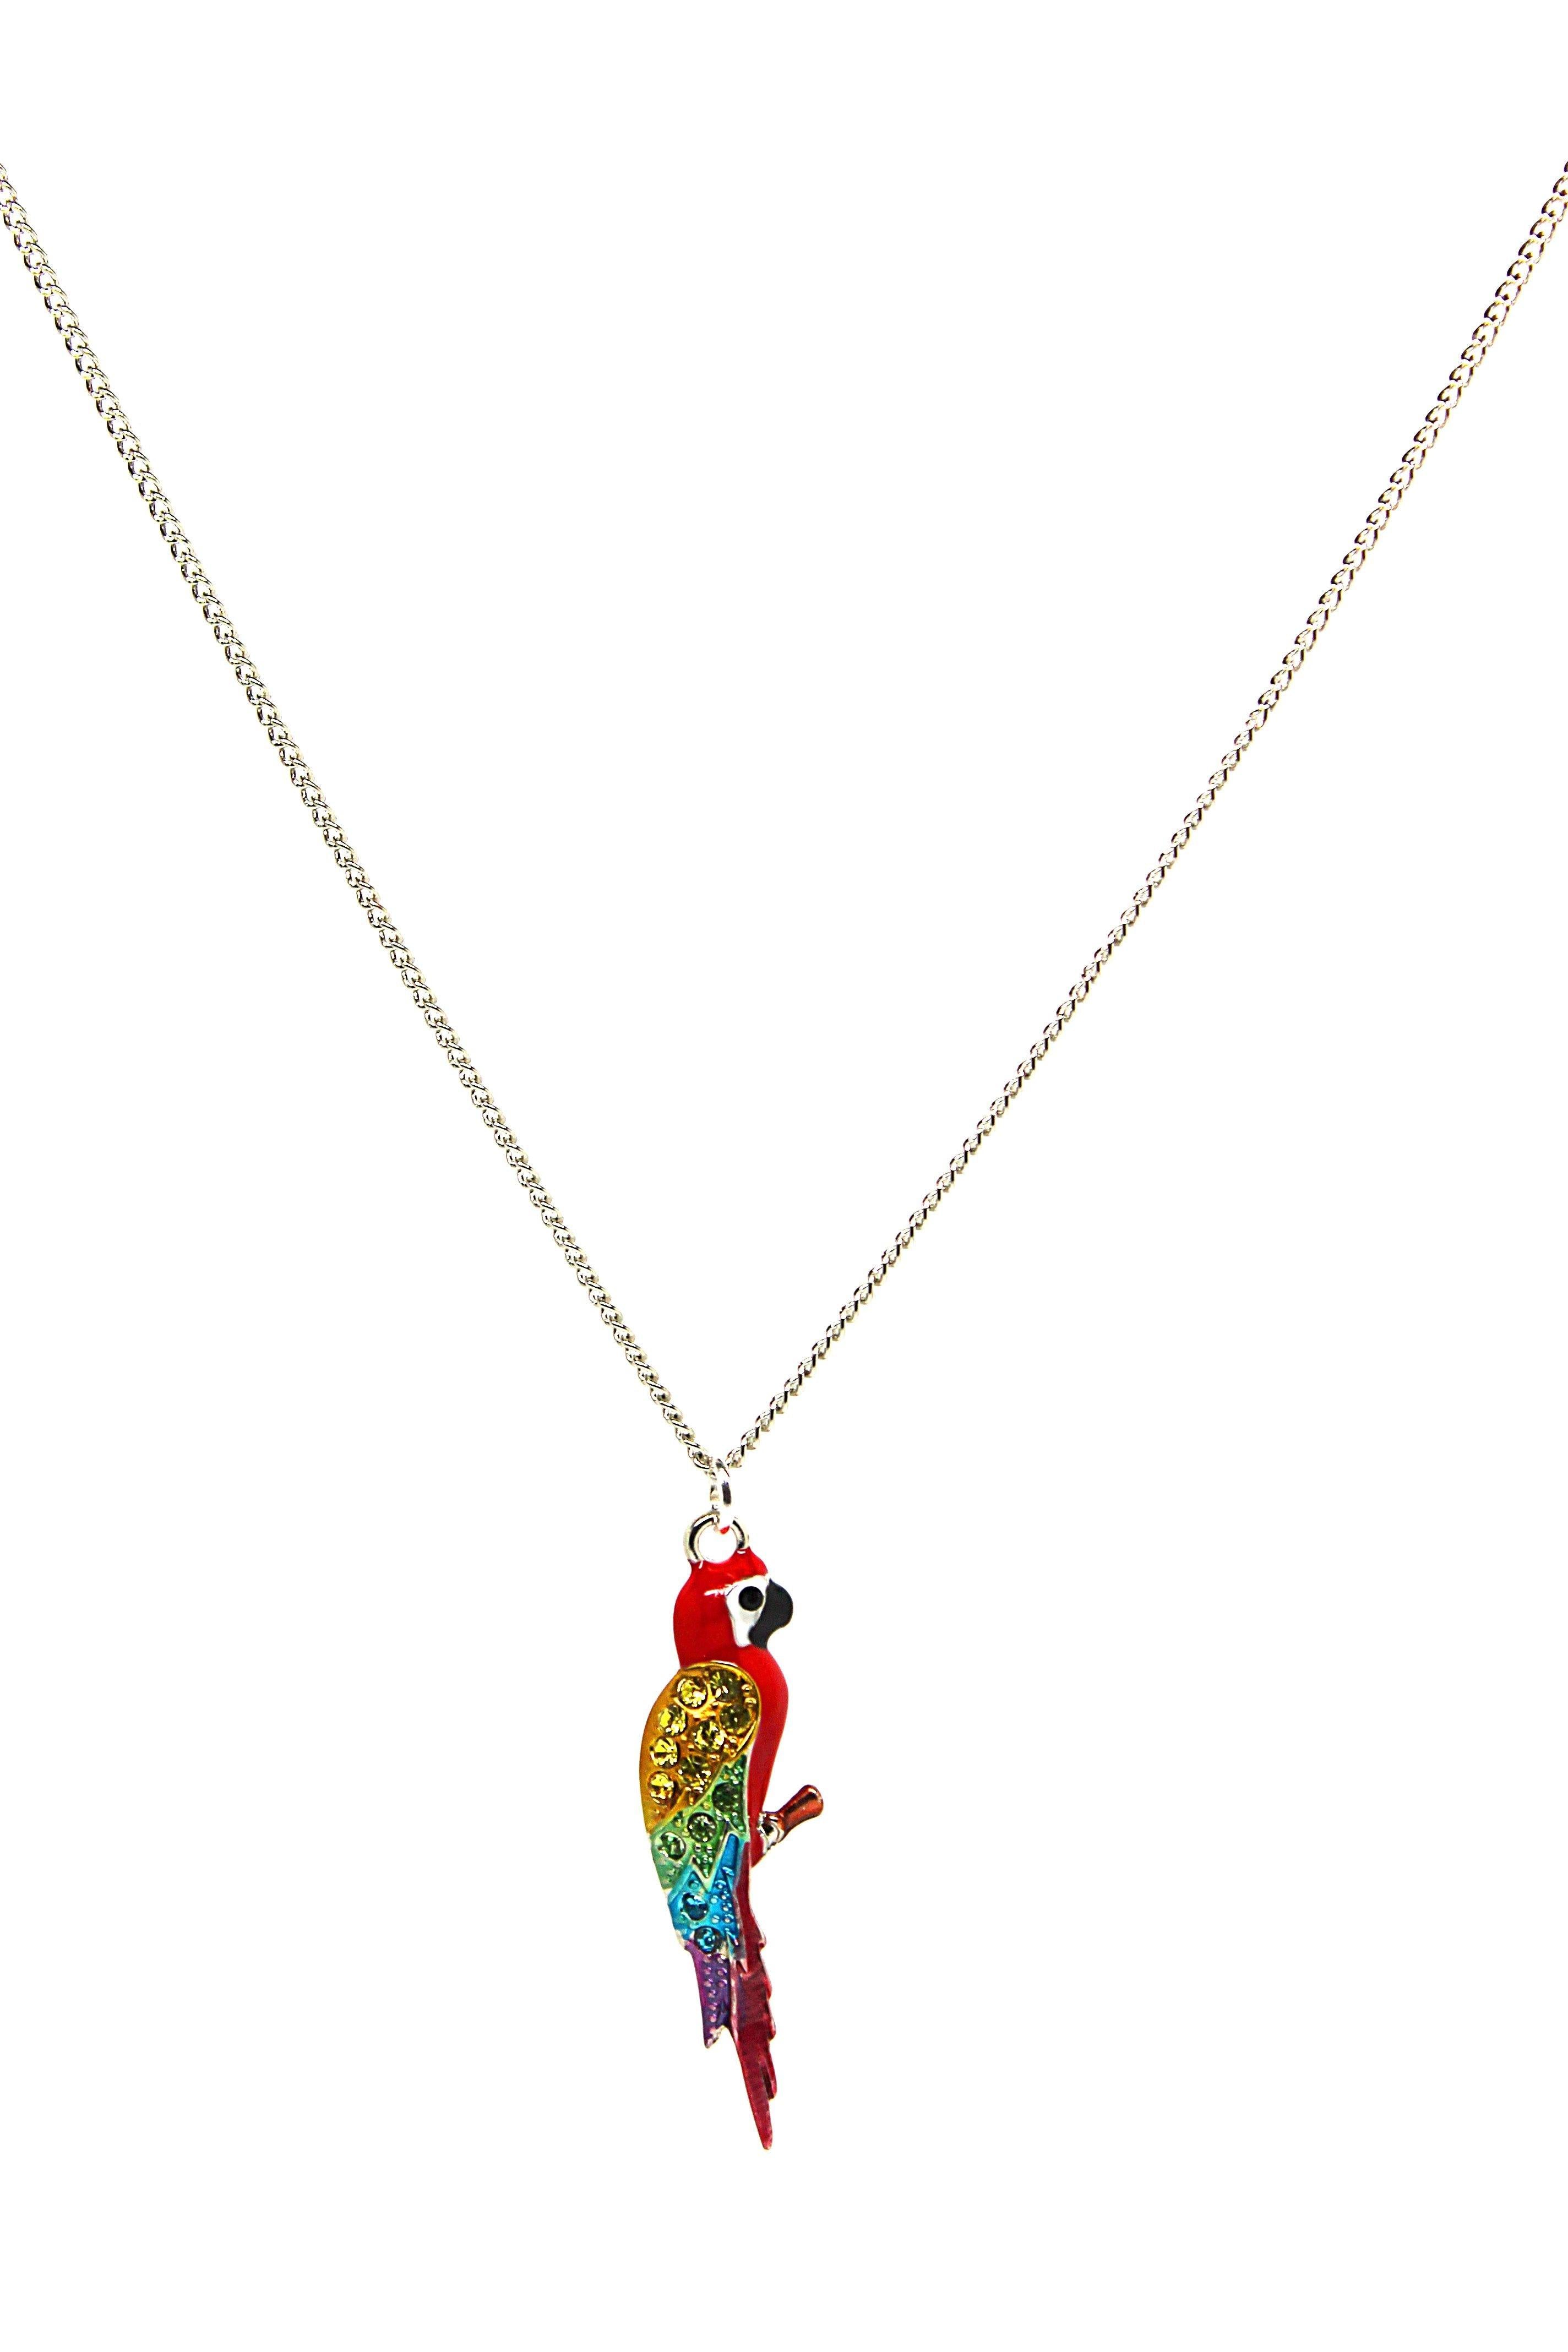 Parrot Red Necklace - Wildtouch - Wildtouch